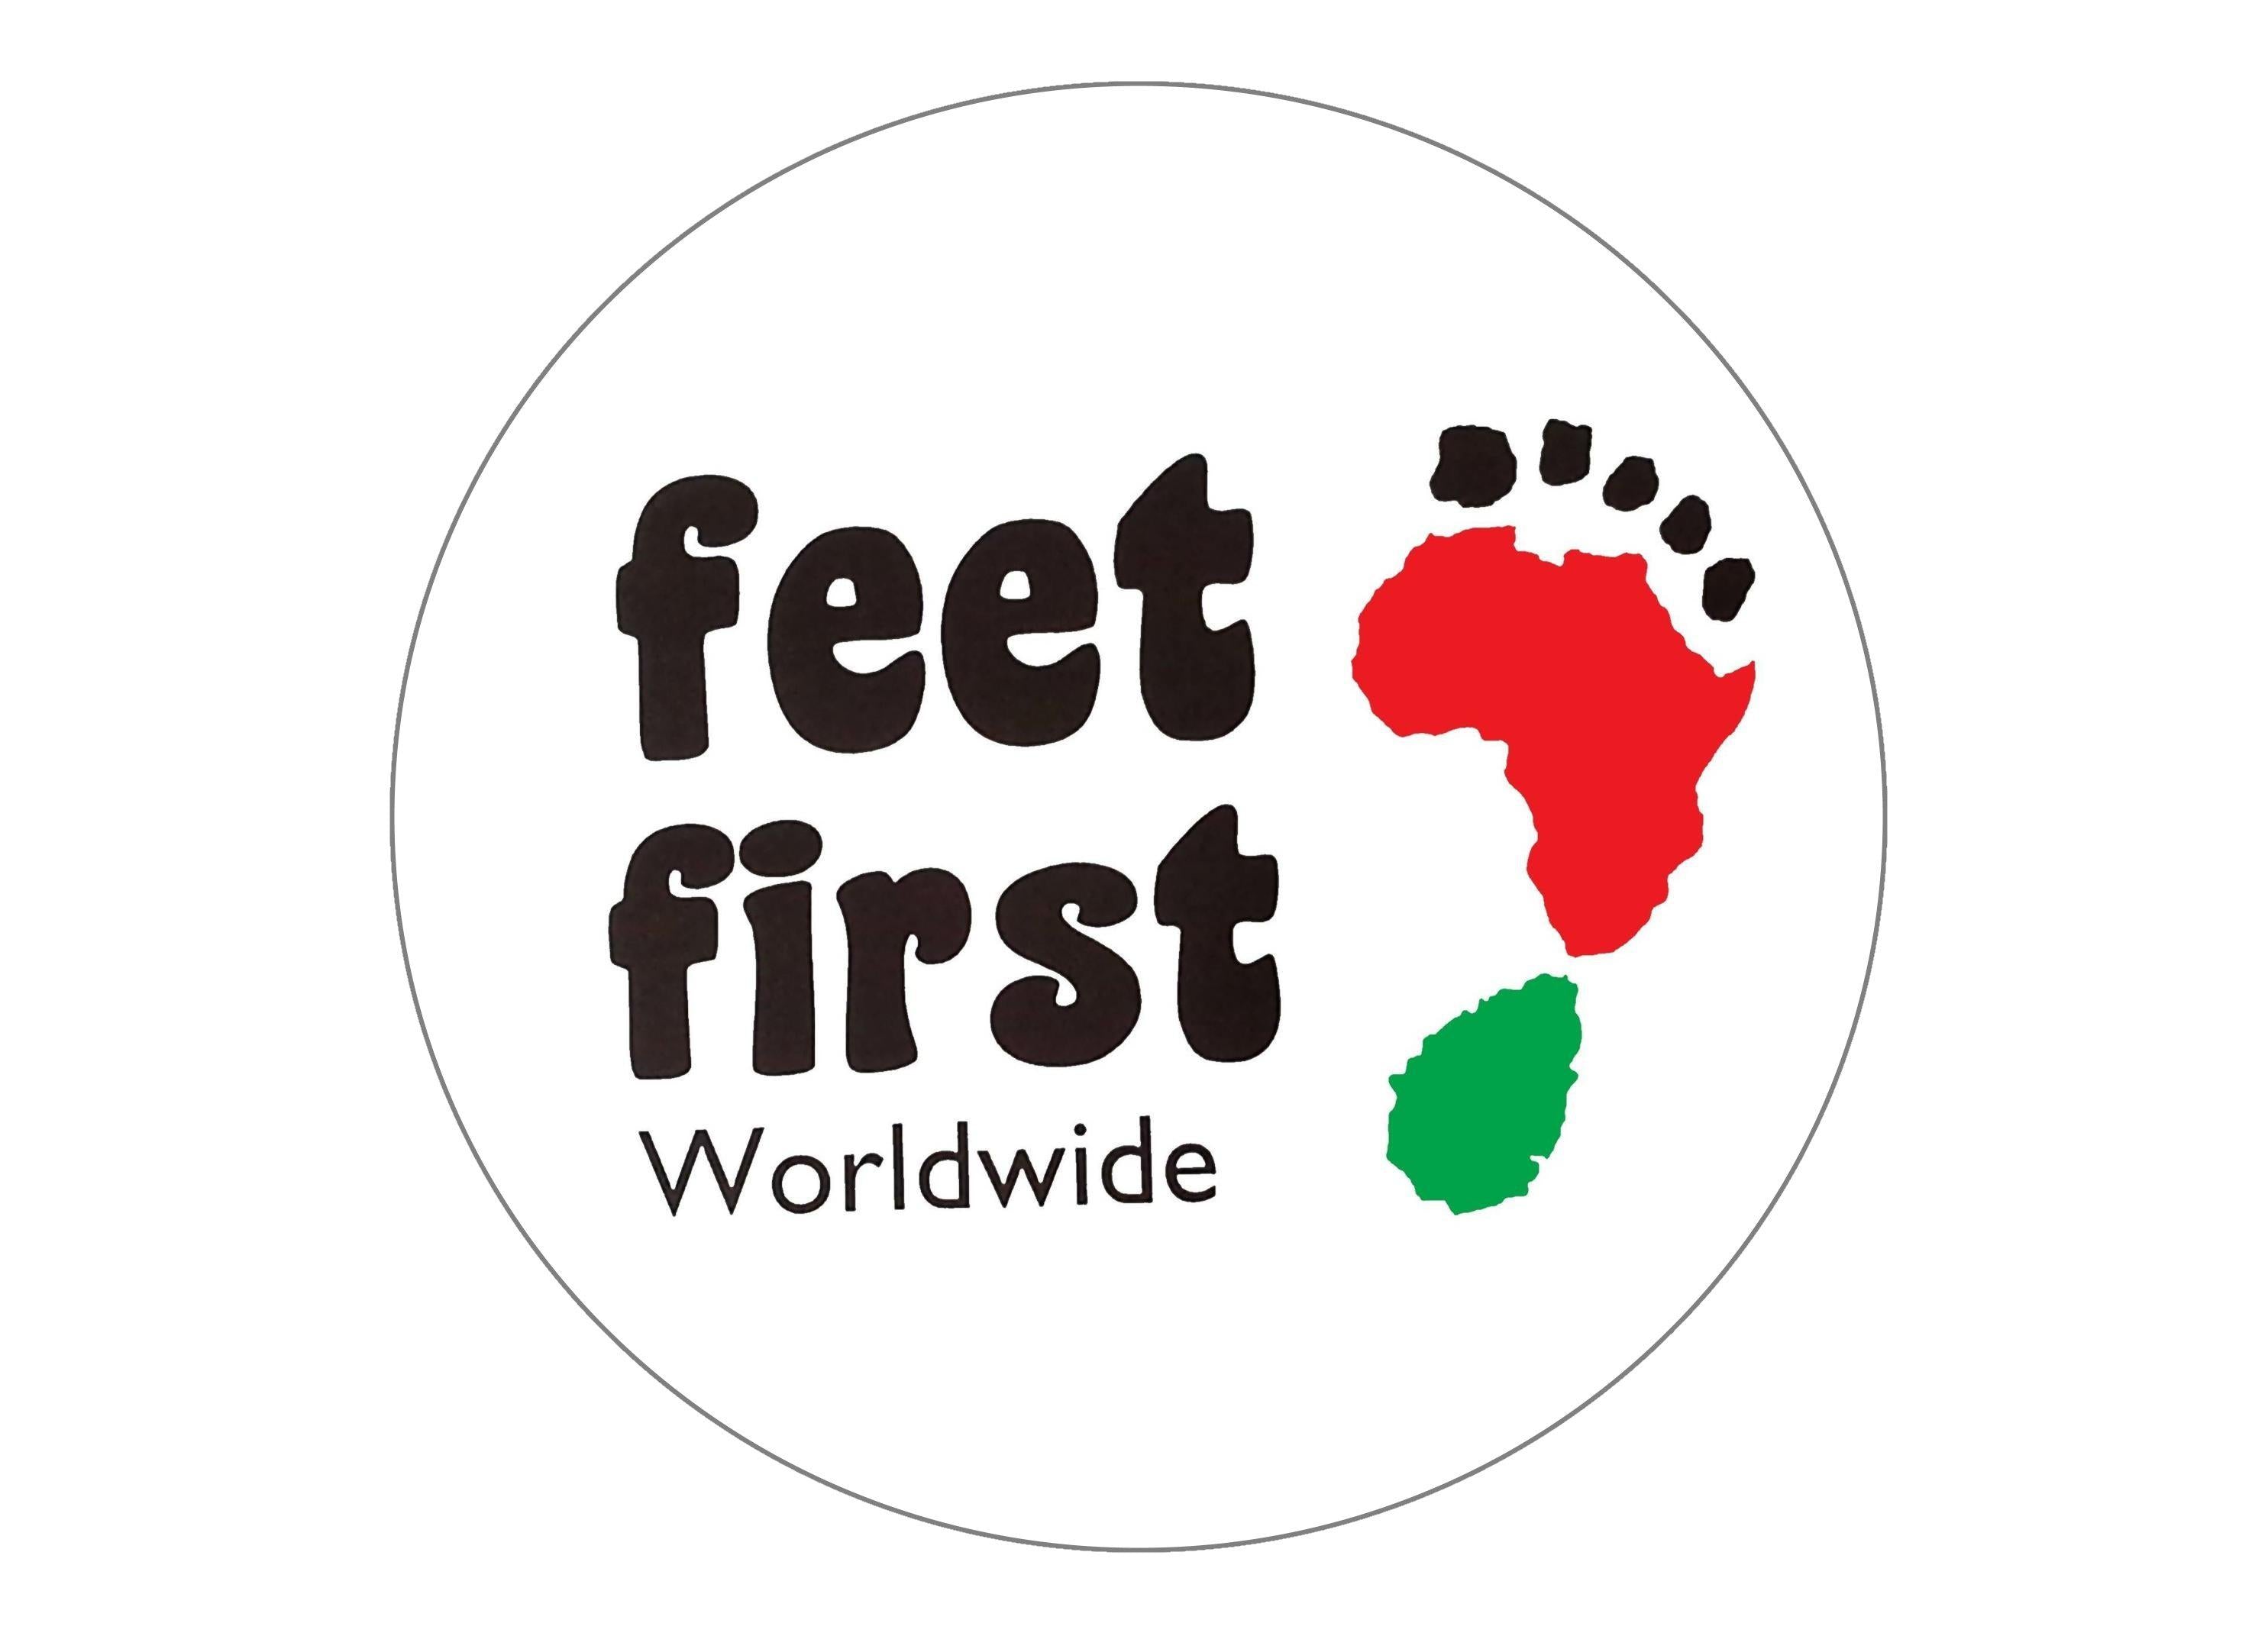 Printed edible charity cake toppers for Feet First Worldwide